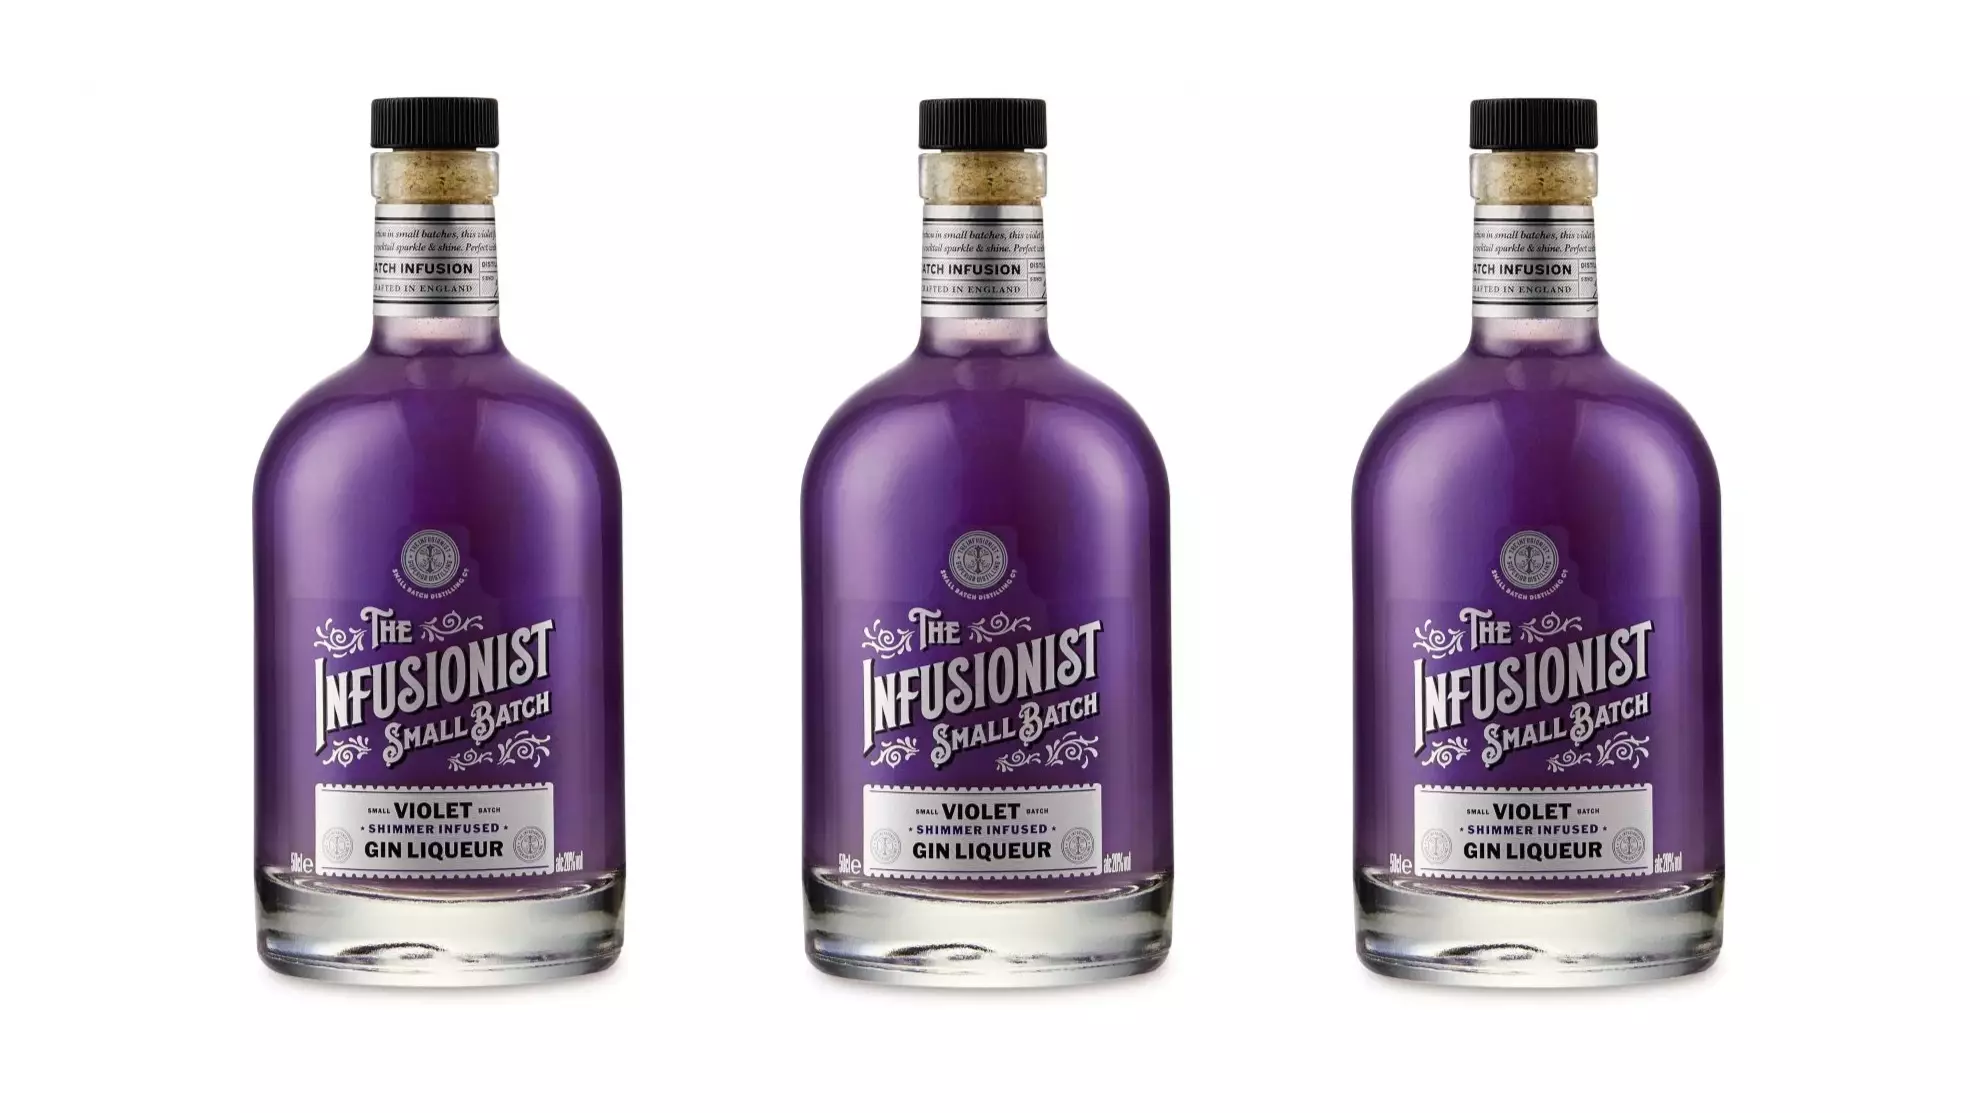 Aldi Is Selling Glittery Parma Violet Flavour Gin And For Just £9.99